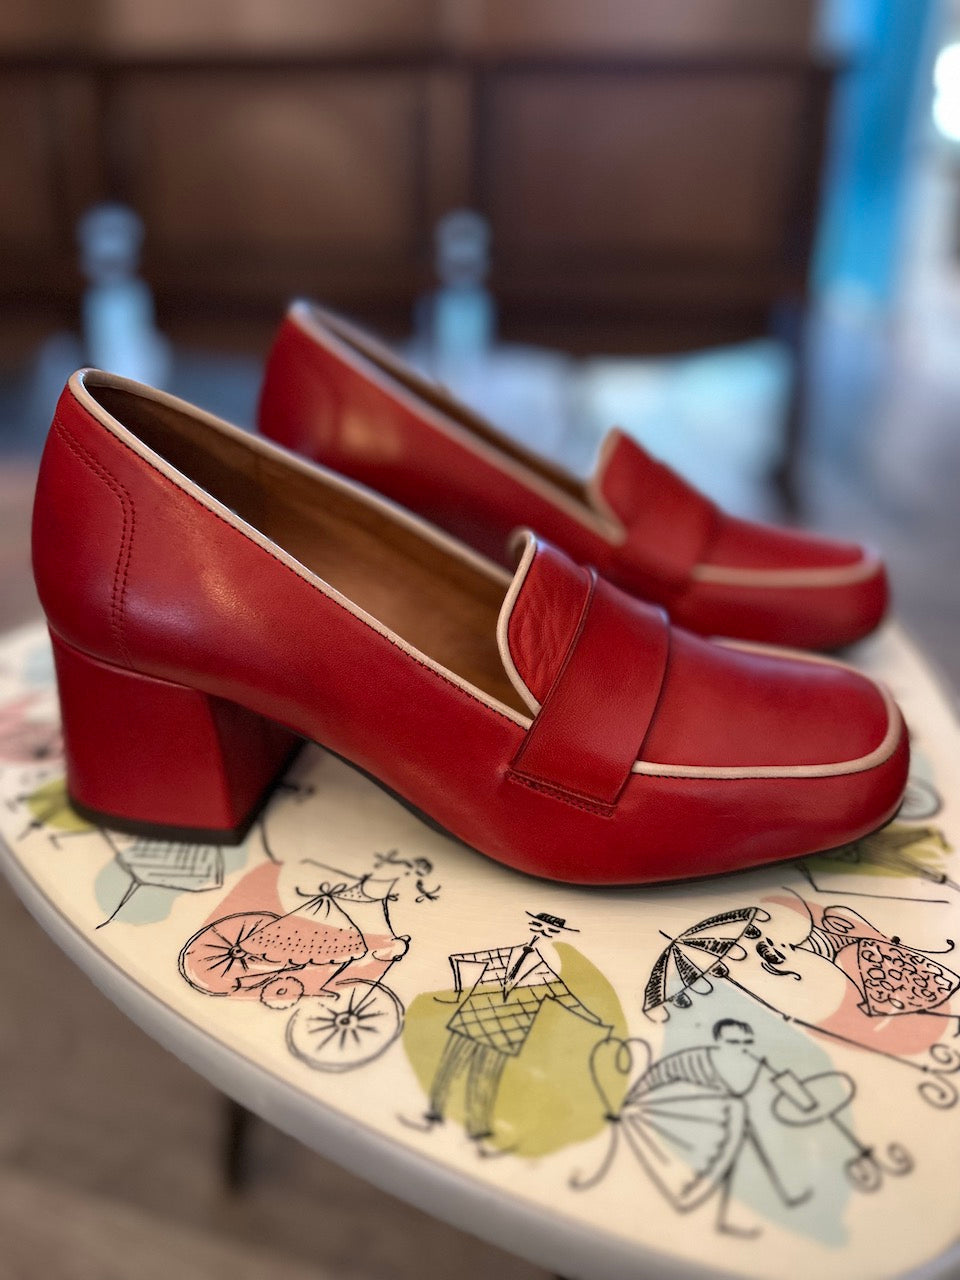 Siana Loafer Style Pumps - red